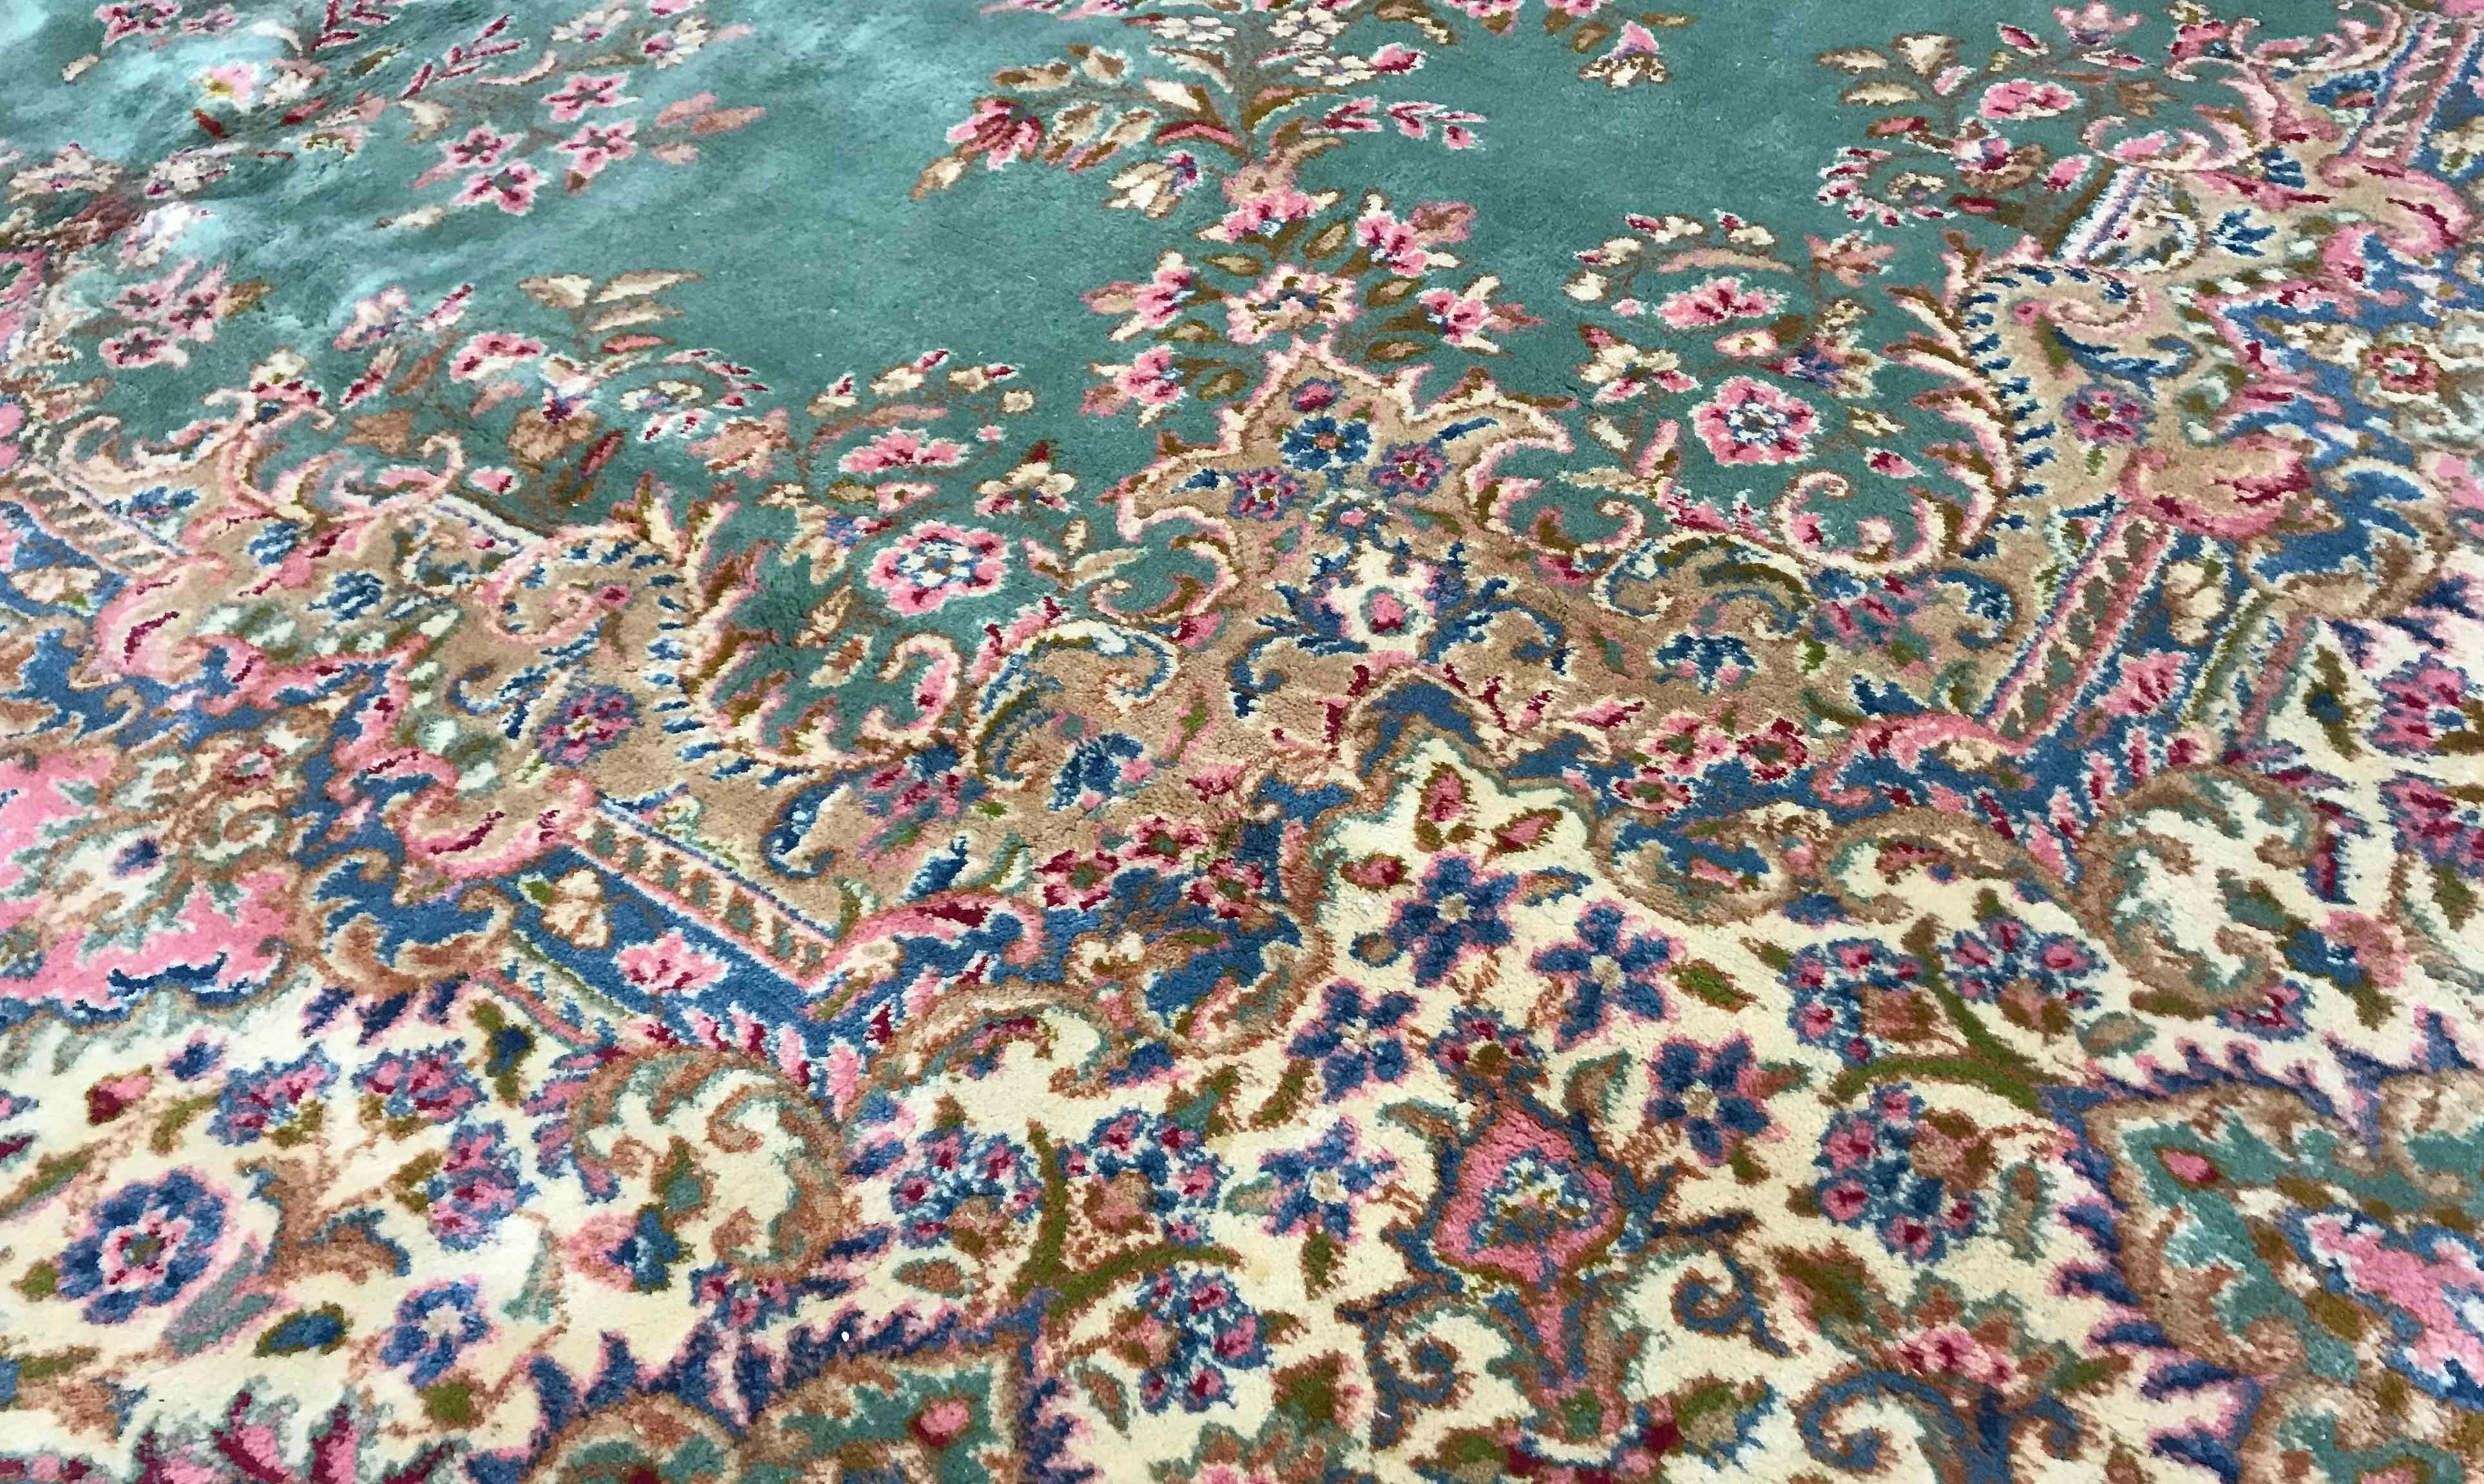 Vintage Persian Kerman rug, circa 1940. A wonderful composition to this rug with the soft green field both enclosing and surrounded by floral designs in soft gentle rose and blues to create this rug with a gentle style and look. Size: 8'11 x 12'9.